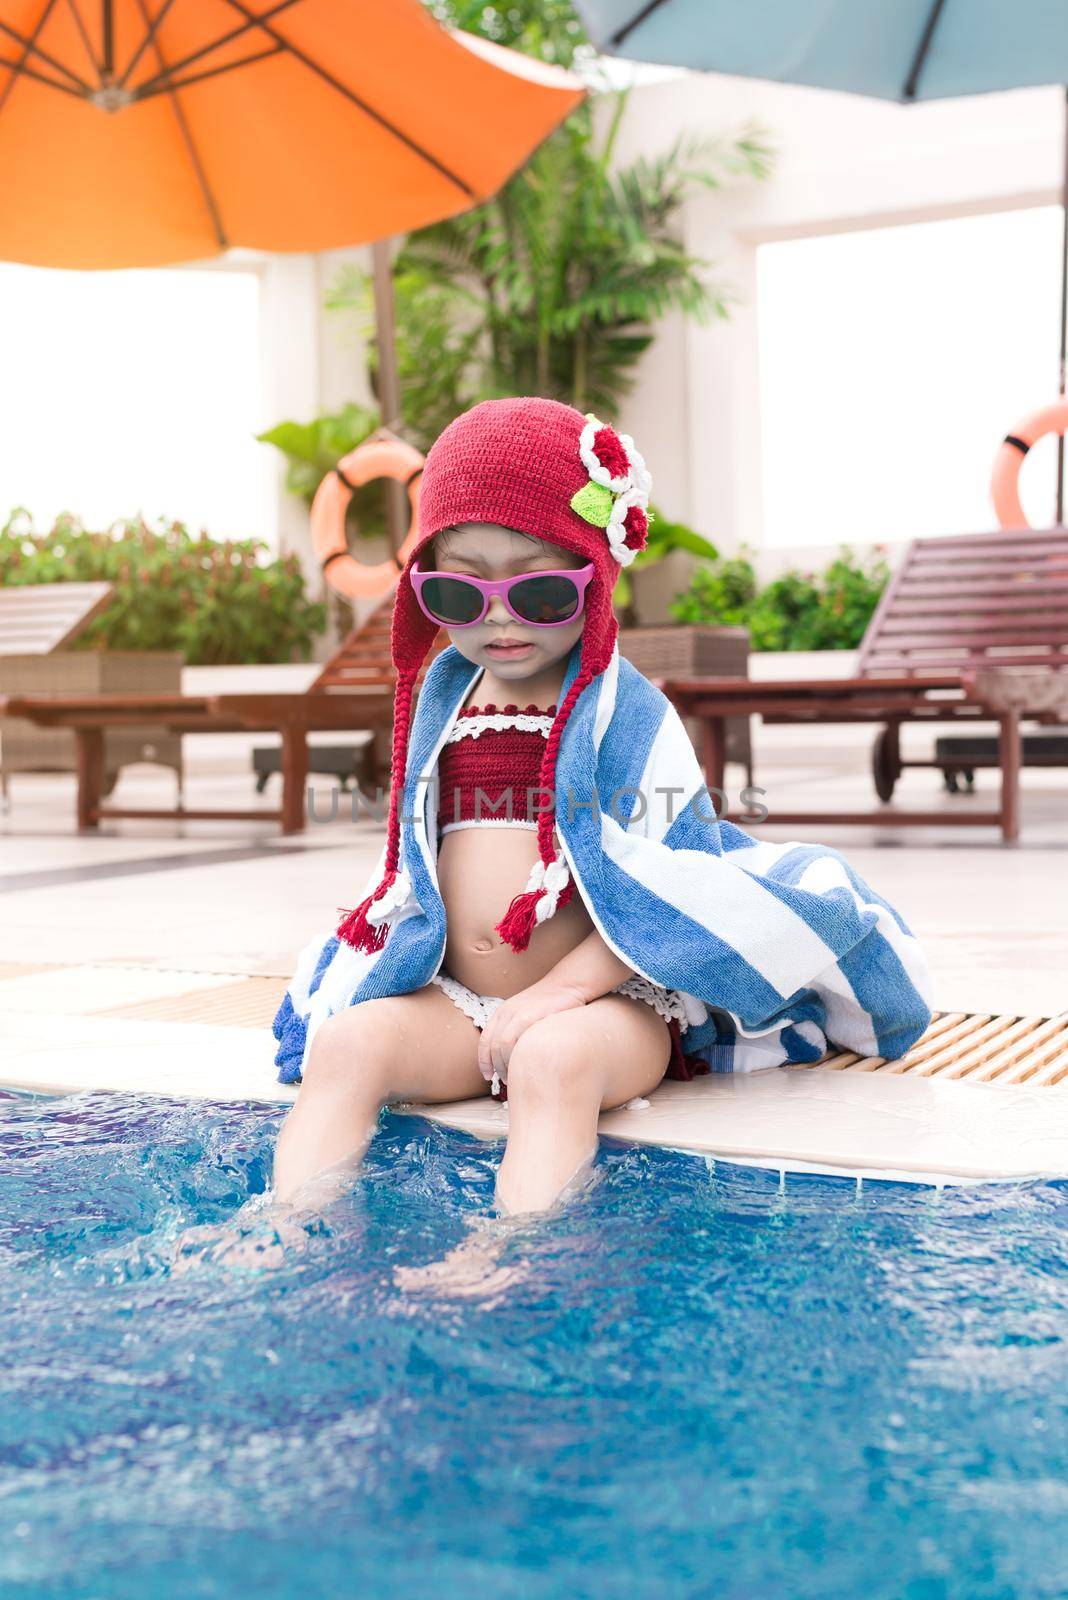 Little girl having fun in the pool. Summer holidays and vacation concept